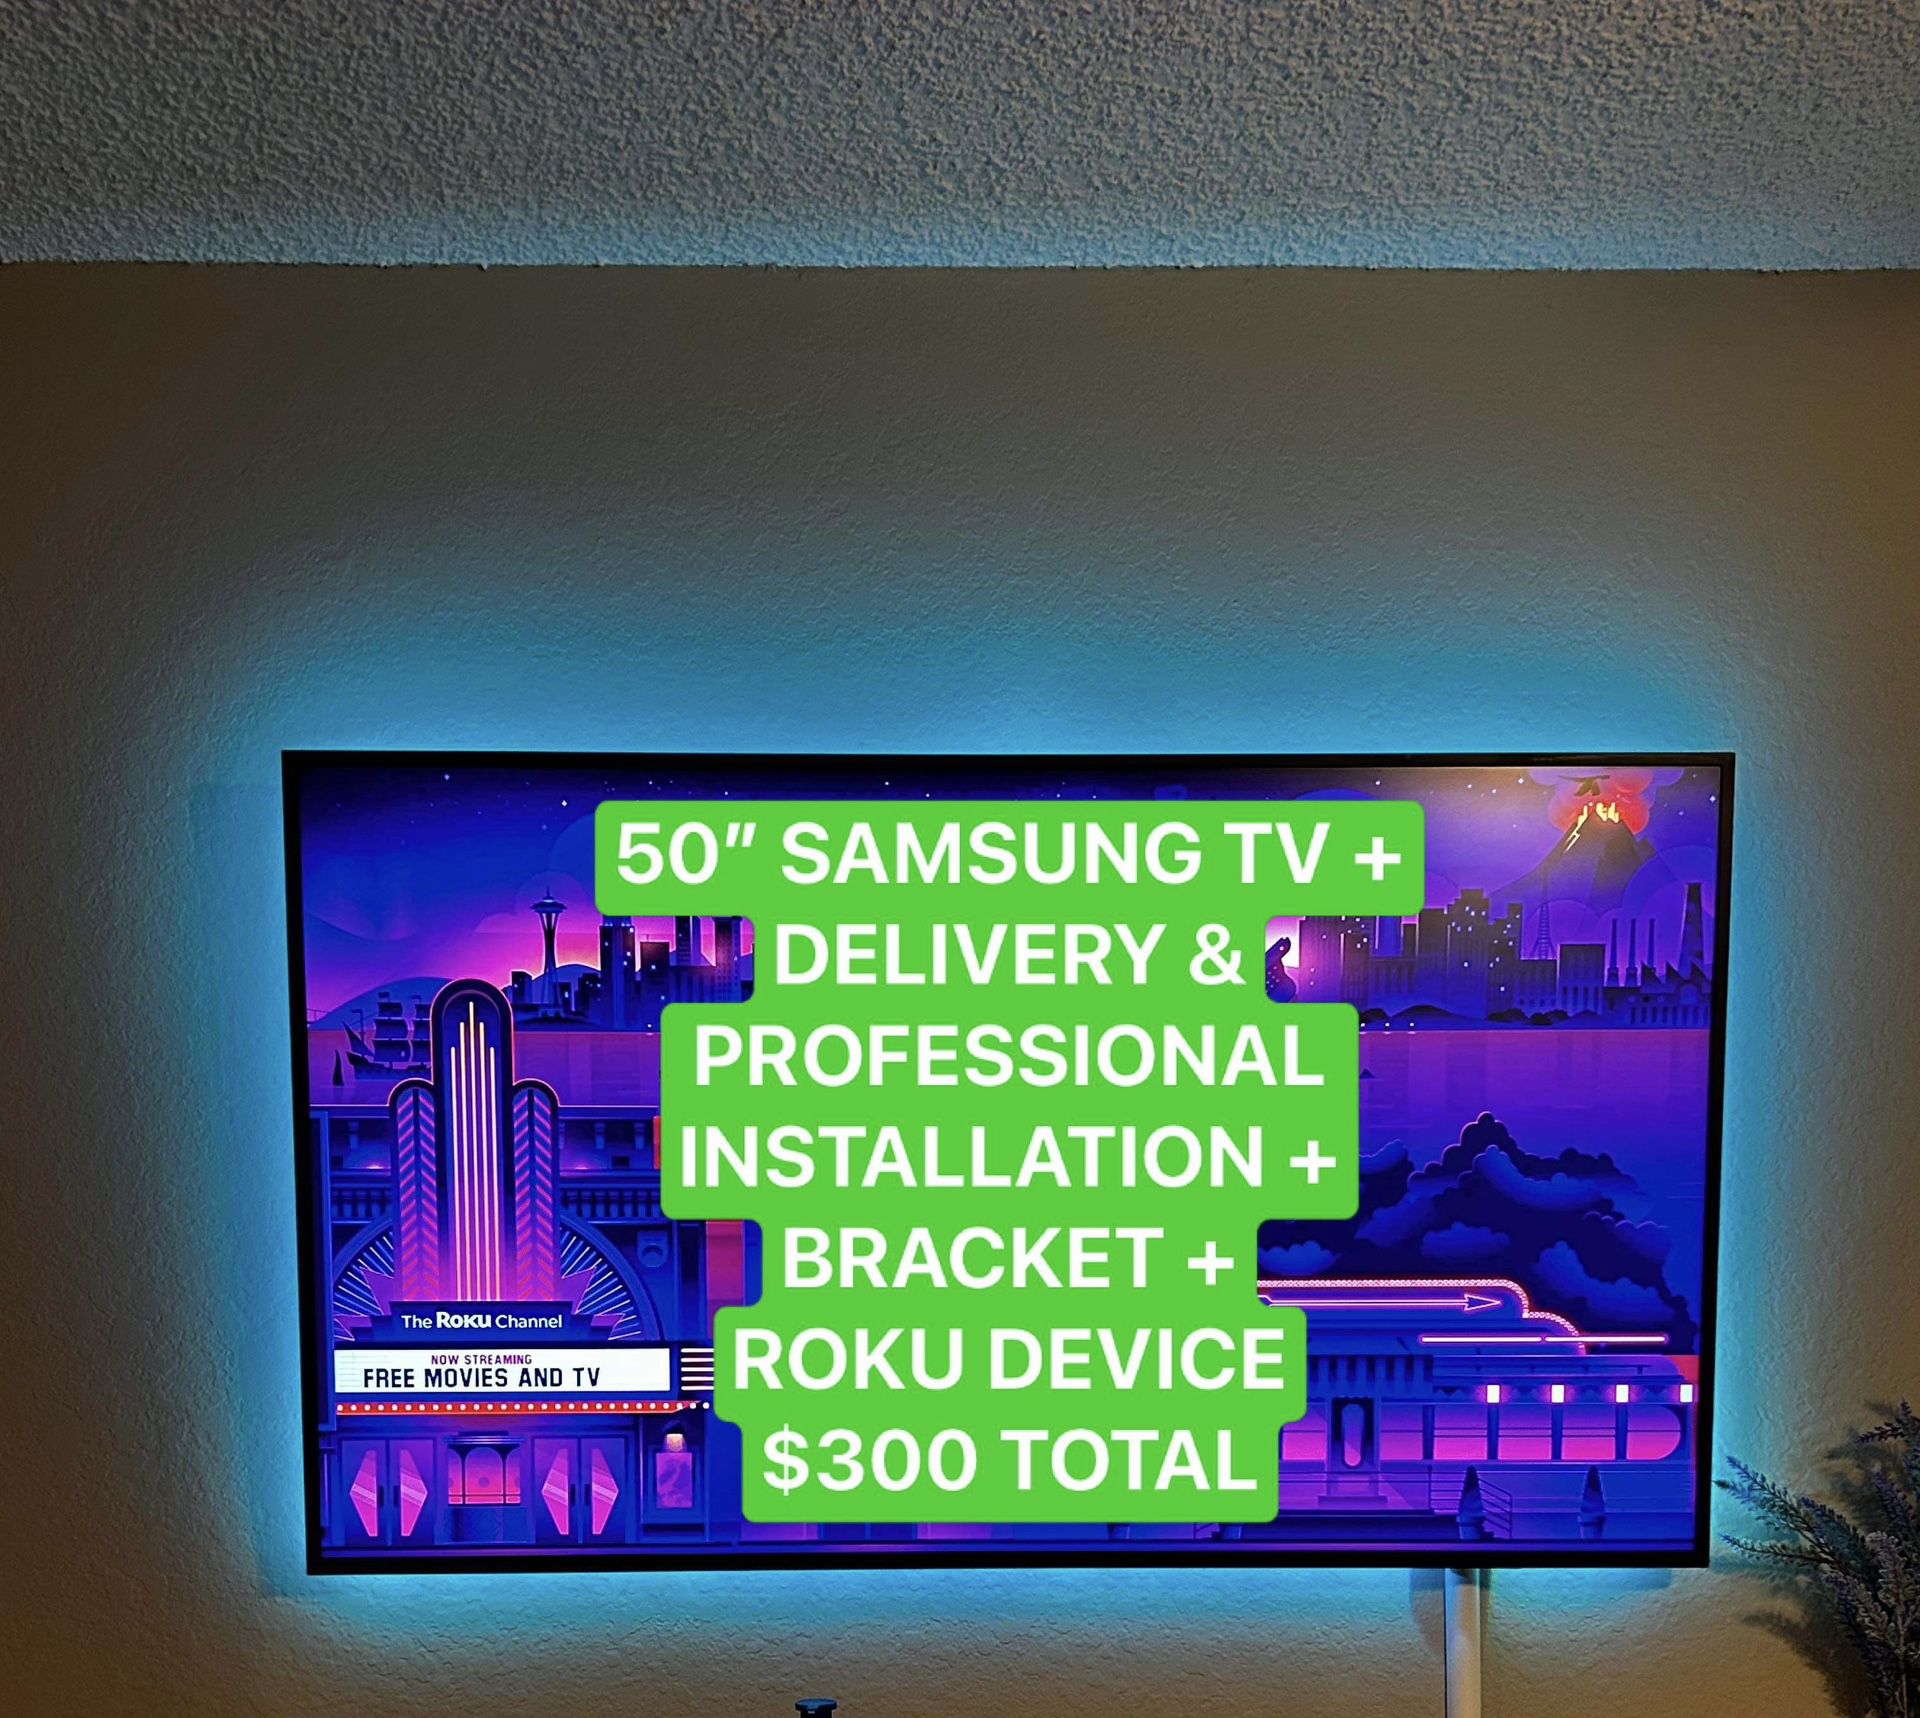 SAMSUNG TV INCLUDES DELIVERY AND PROFESSIONAL MOUNTING ON THE WALL